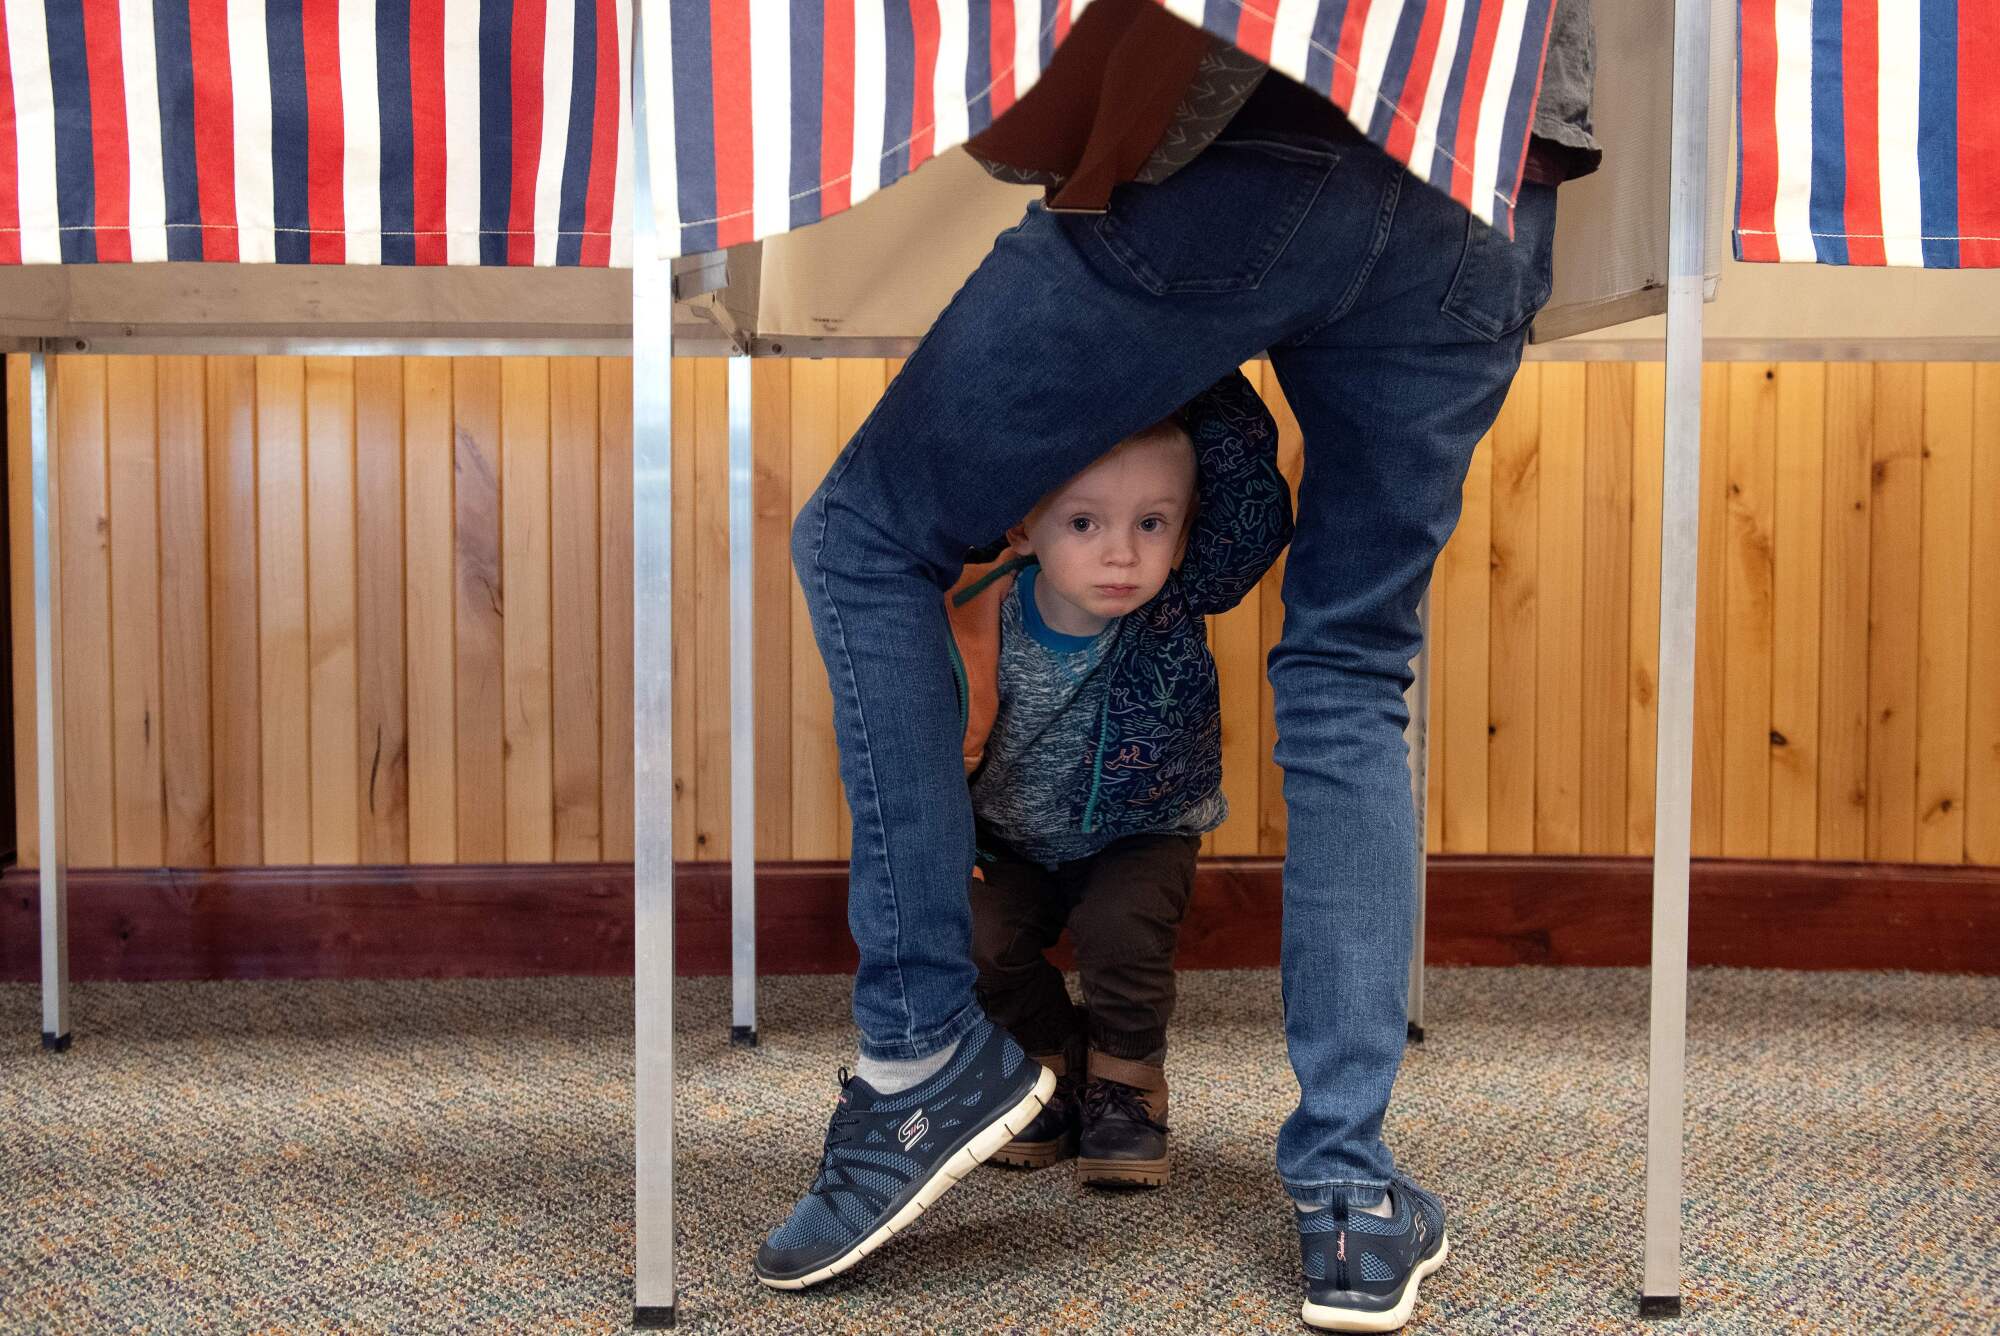 Two-year-old Noah Davenport of Granby, Colo., waits for his mother to cast her ballot at the Granby Town Hall.